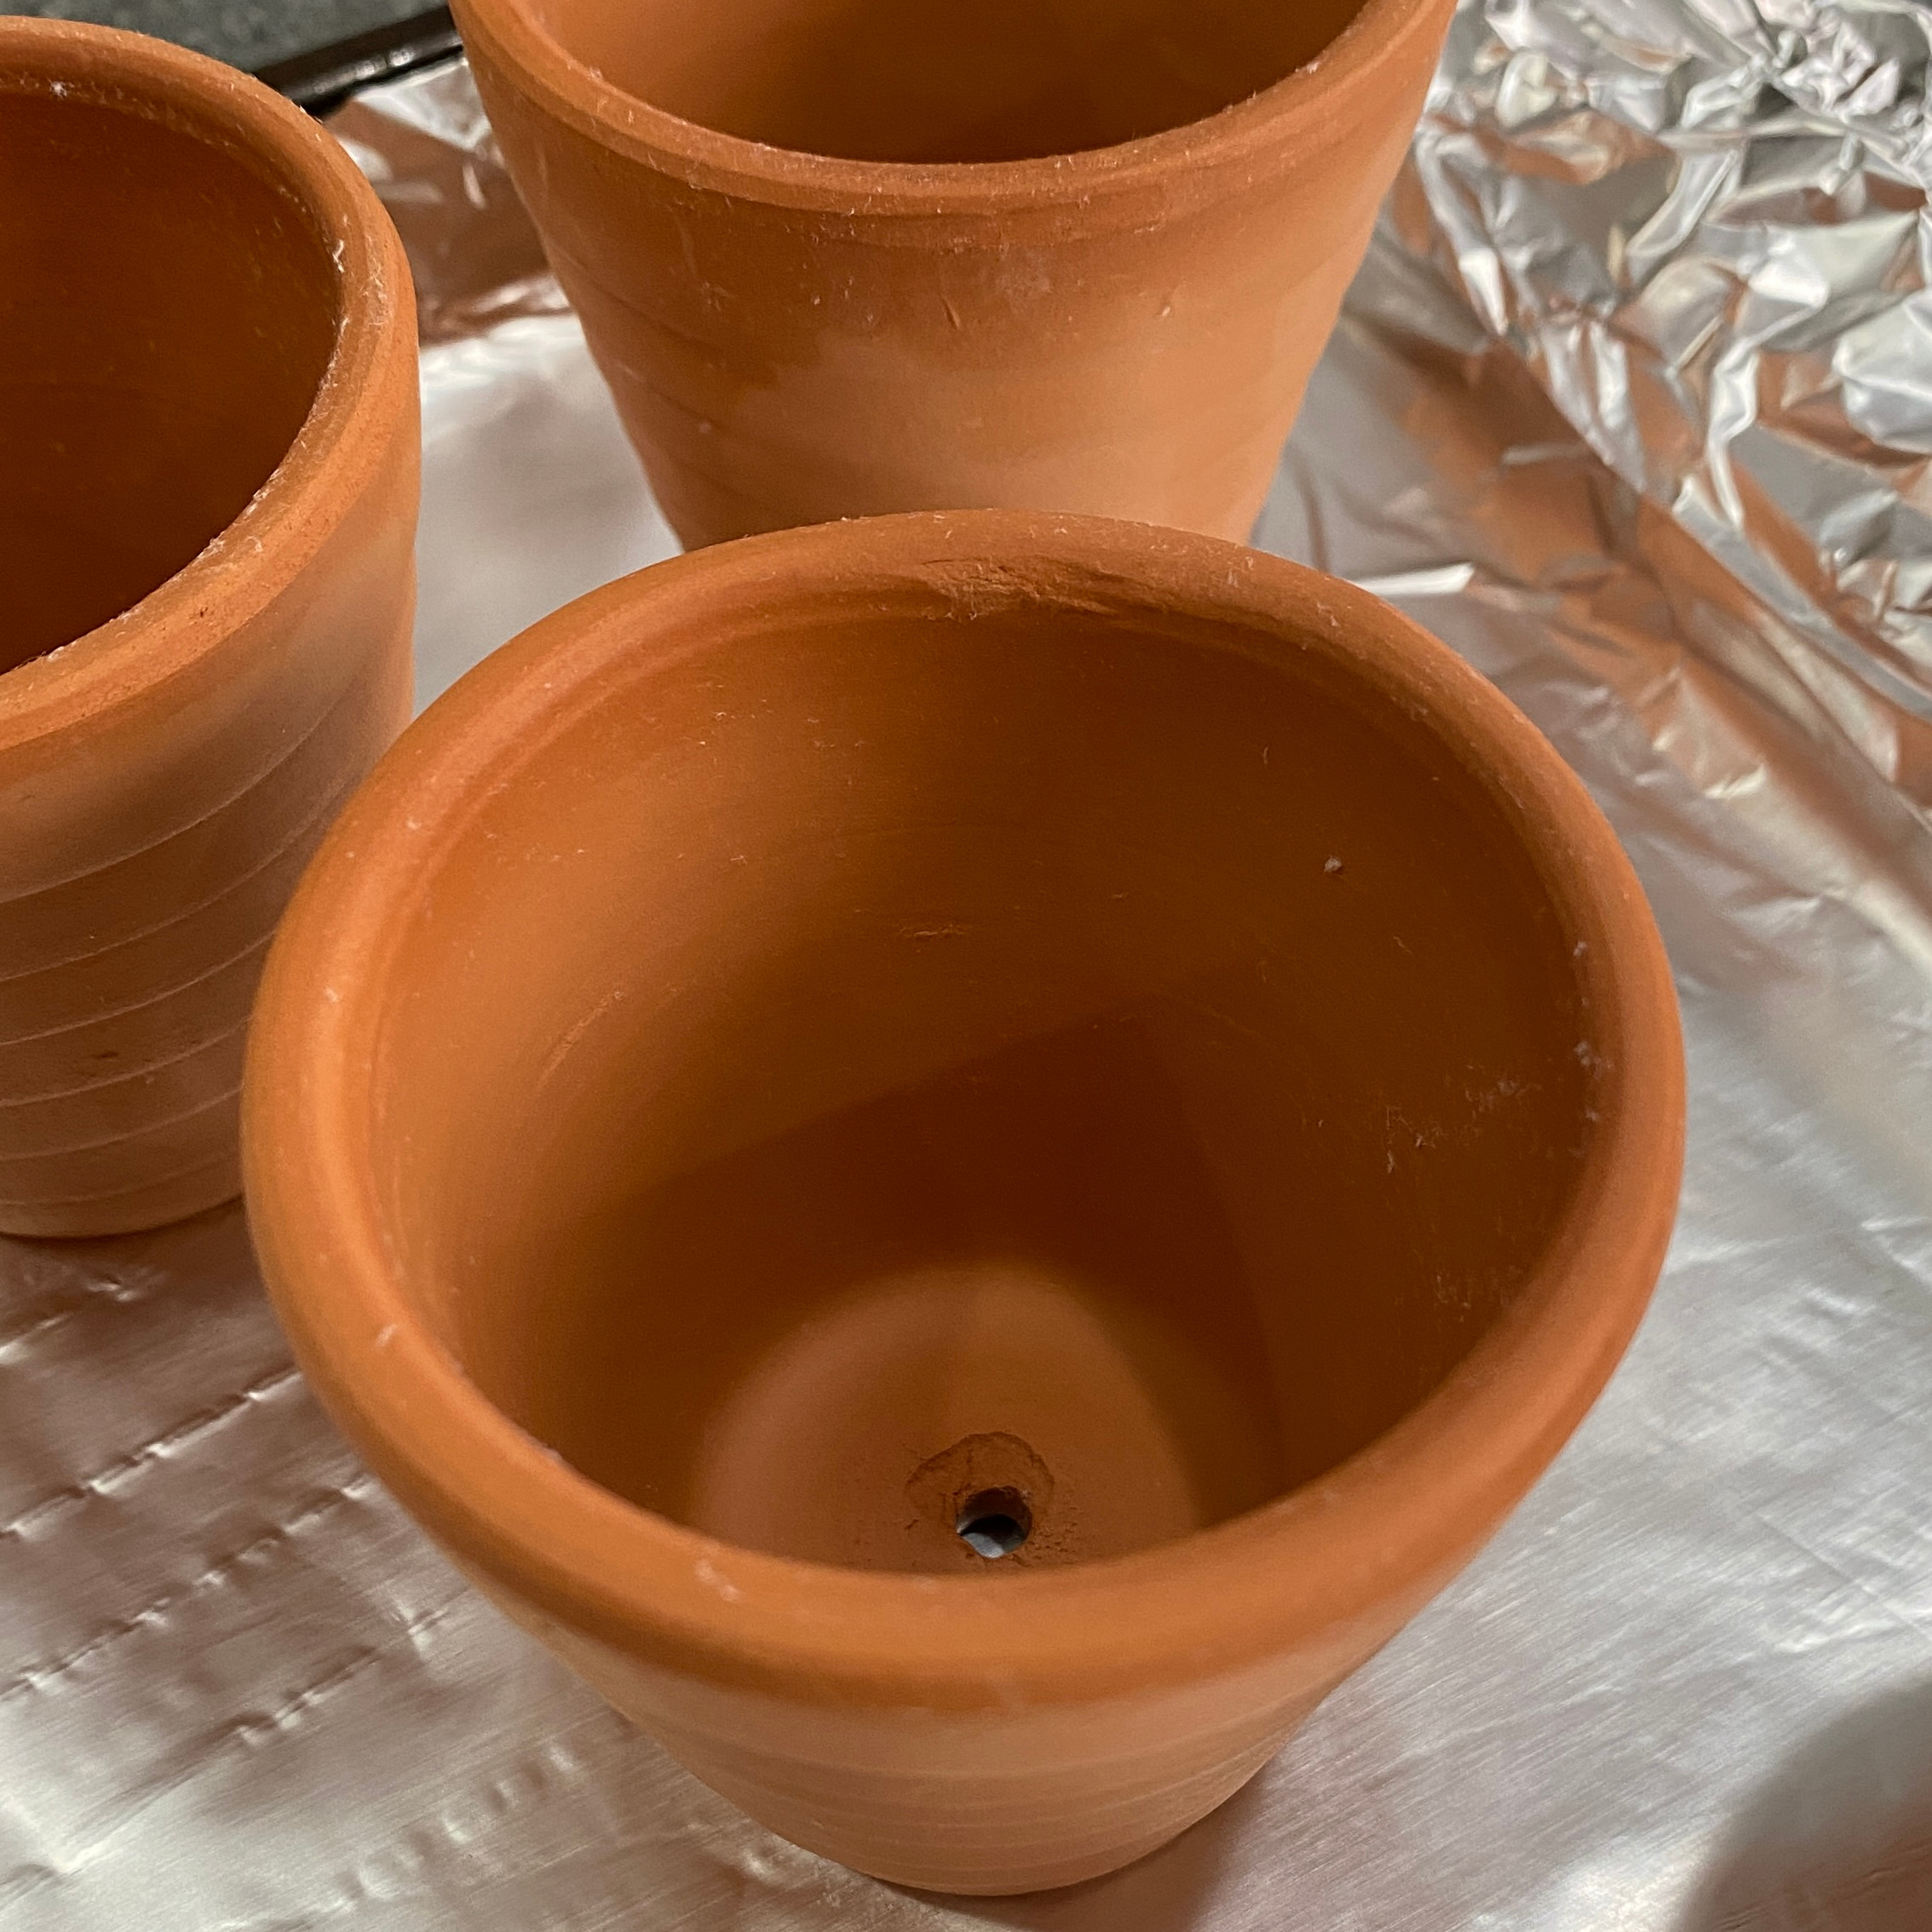 How to Bake in a Clay Flower Pot